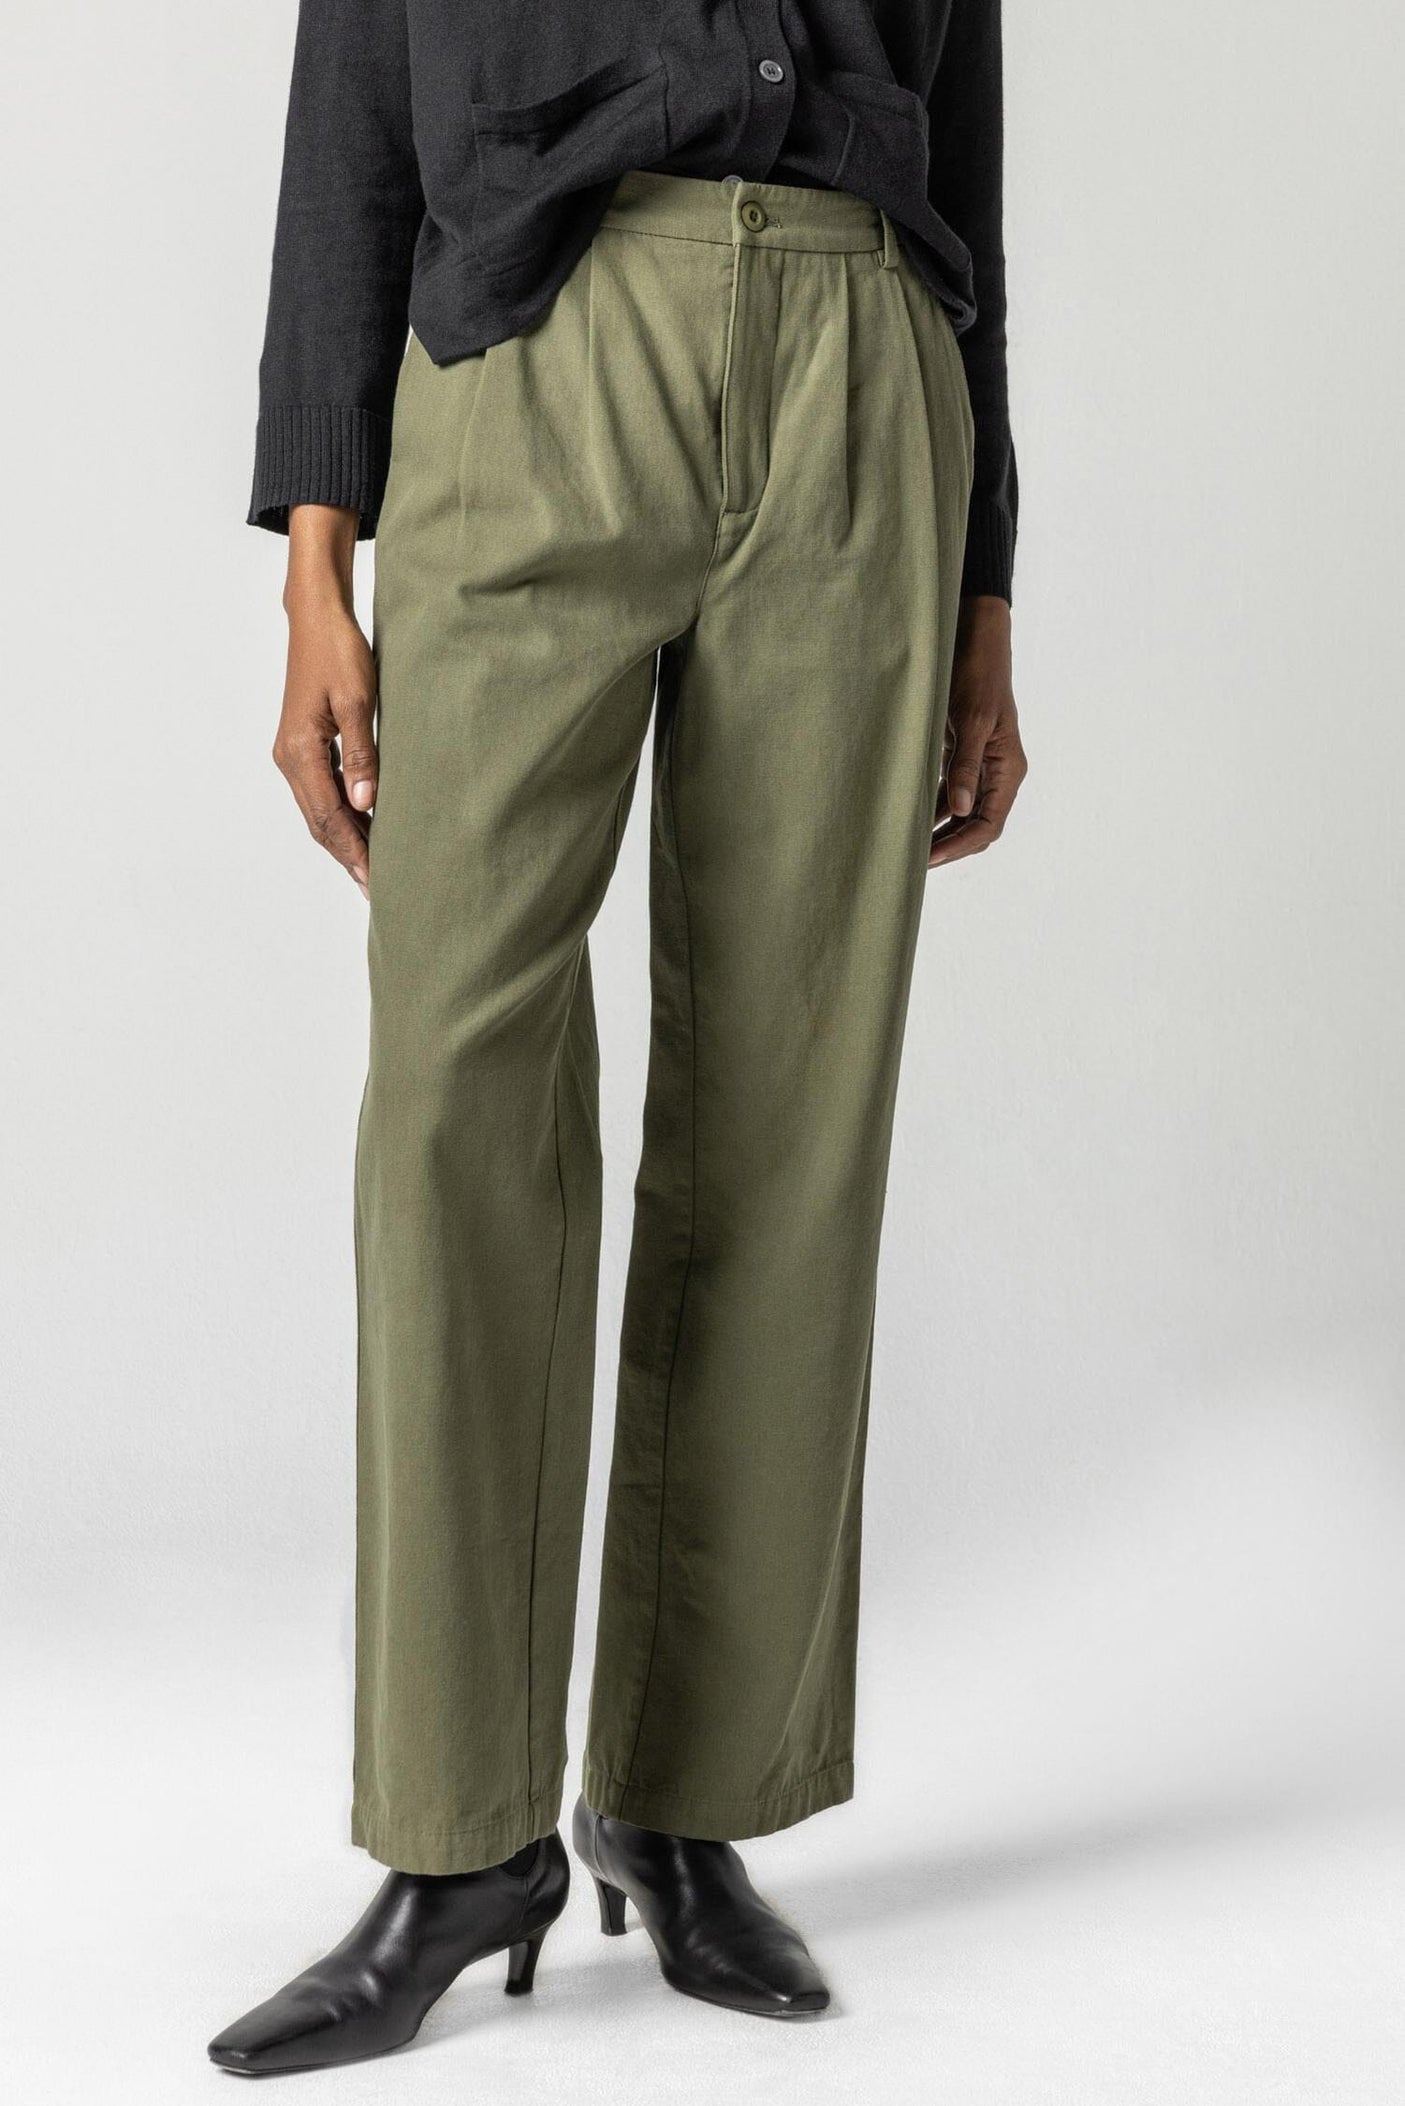 Buy STOP Womens Solid Pleated Front Pants | Shoppers Stop